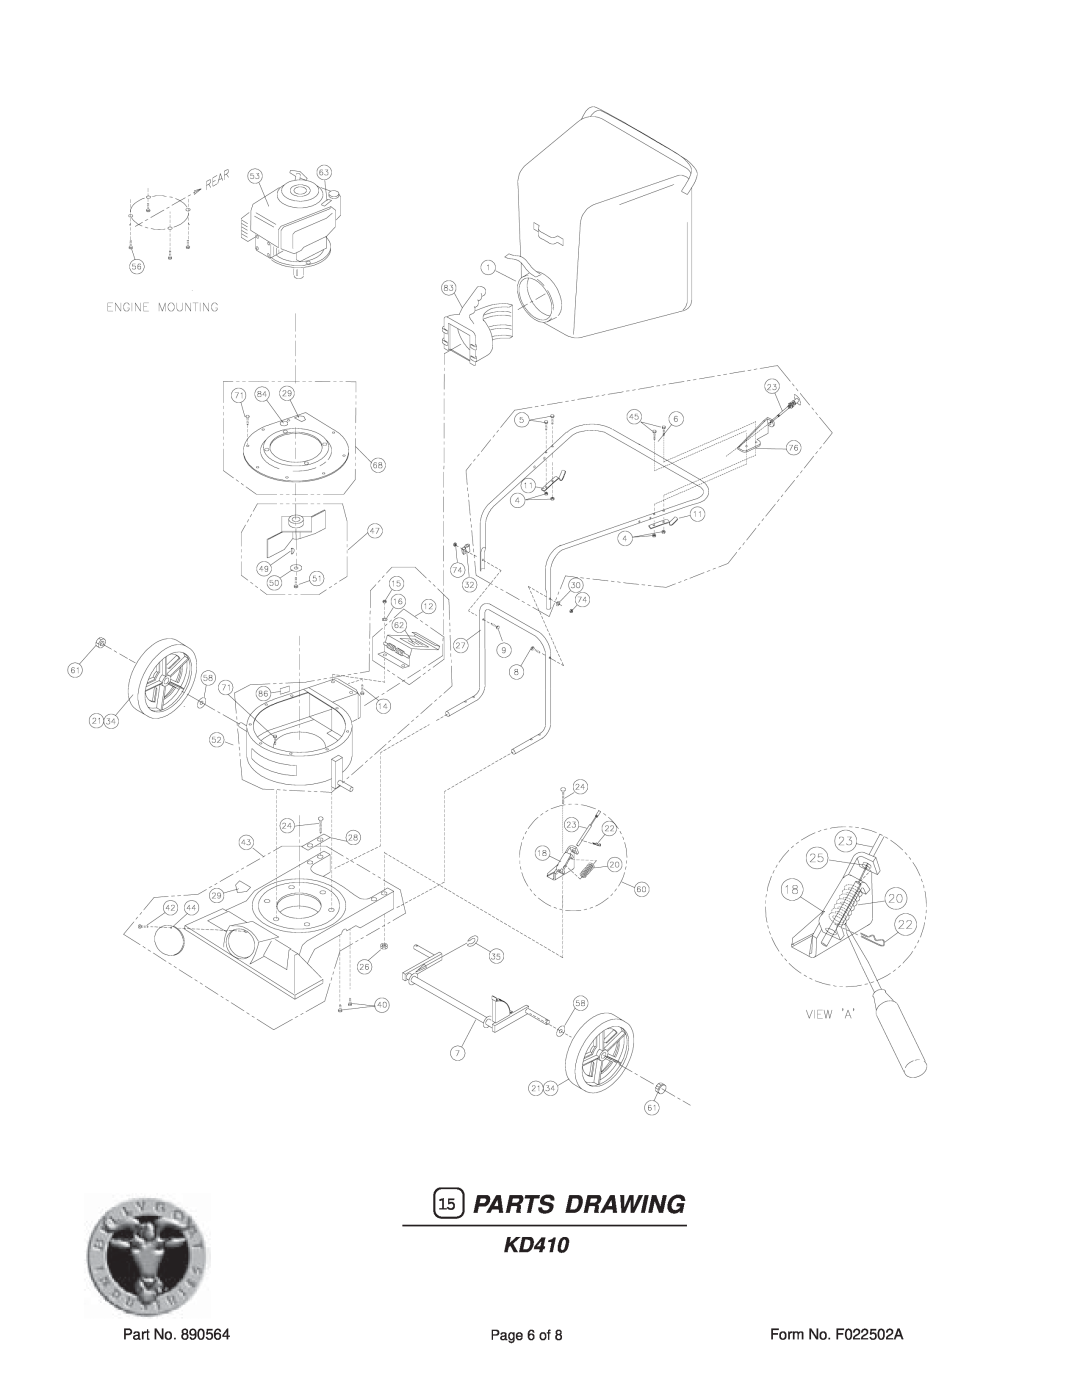 Billy Goat KD 410 specifications Parts Drawing, KD410 